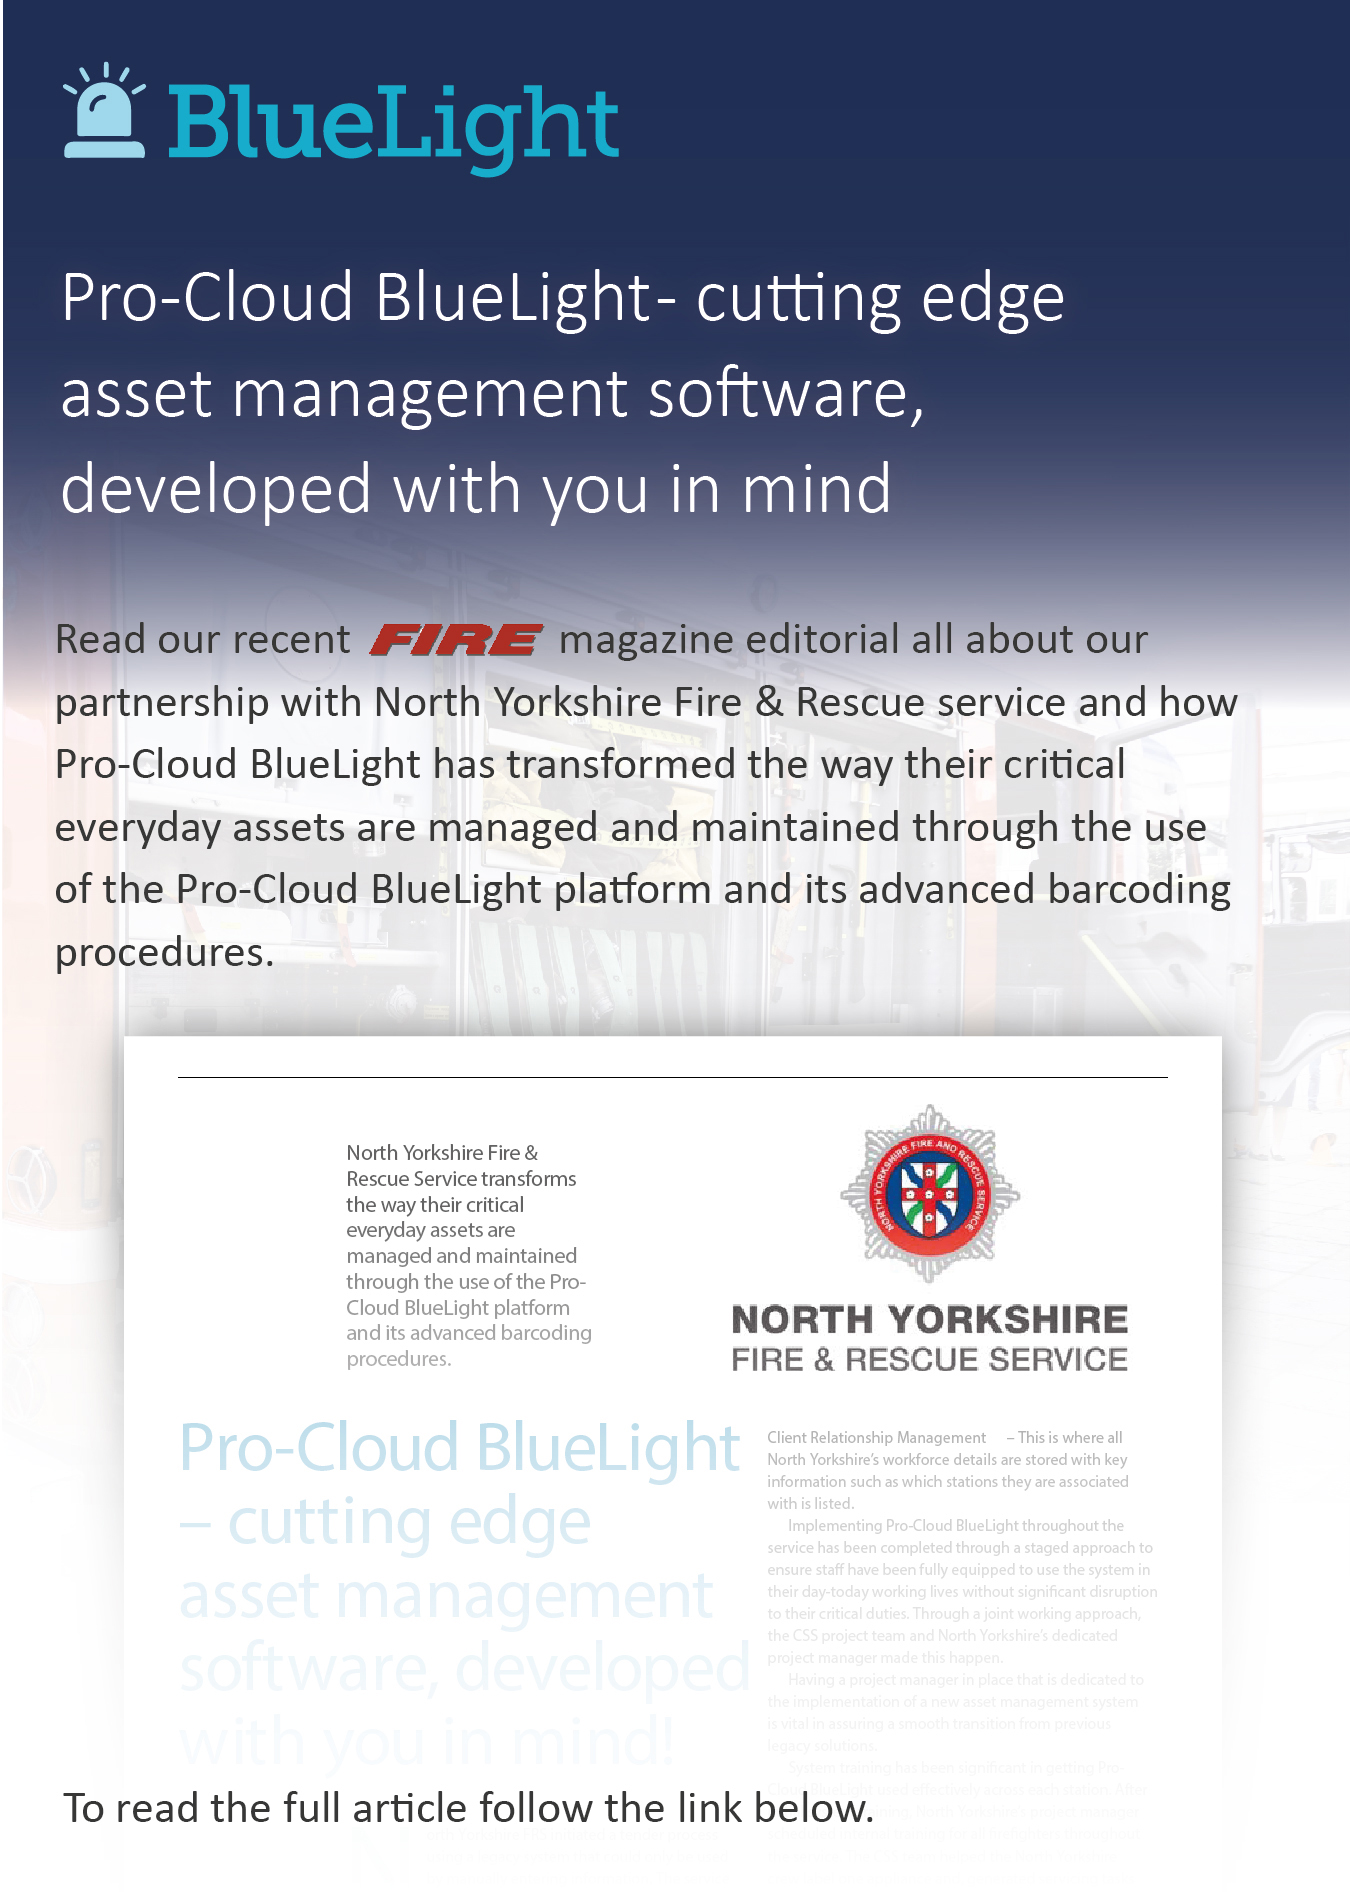 Read our recent FIRE magazine editorial all about our partnership with North Yorkshire Fire & Rescue service and how Pro-Cloud BlueLight has transformed the way their critical everyday assets are managed and maintained through the use of the Pro-Cloud BlueLight platform and its advanced barcoding procedures.